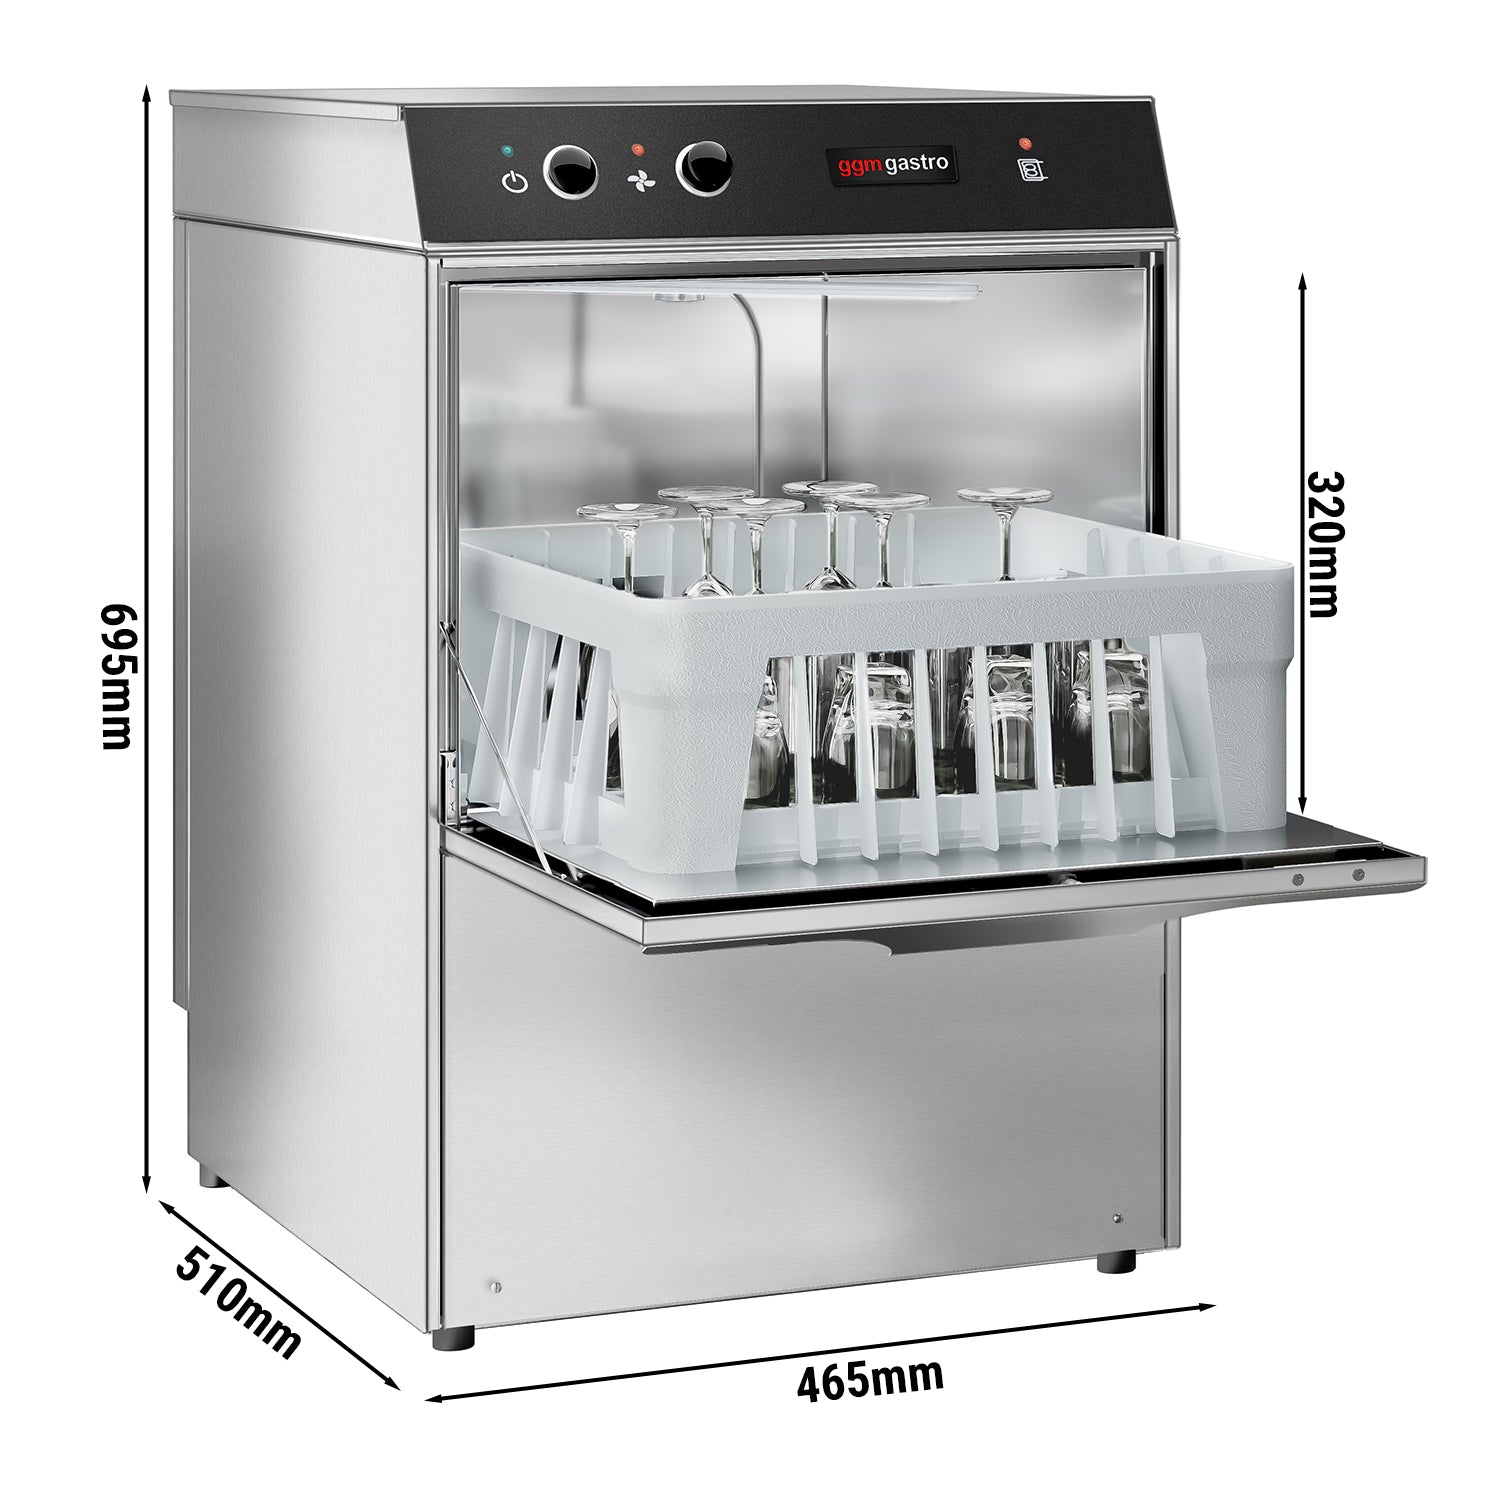 Dishwasher, 2.9 kW, with drain pump, with automatic detergent dispenser